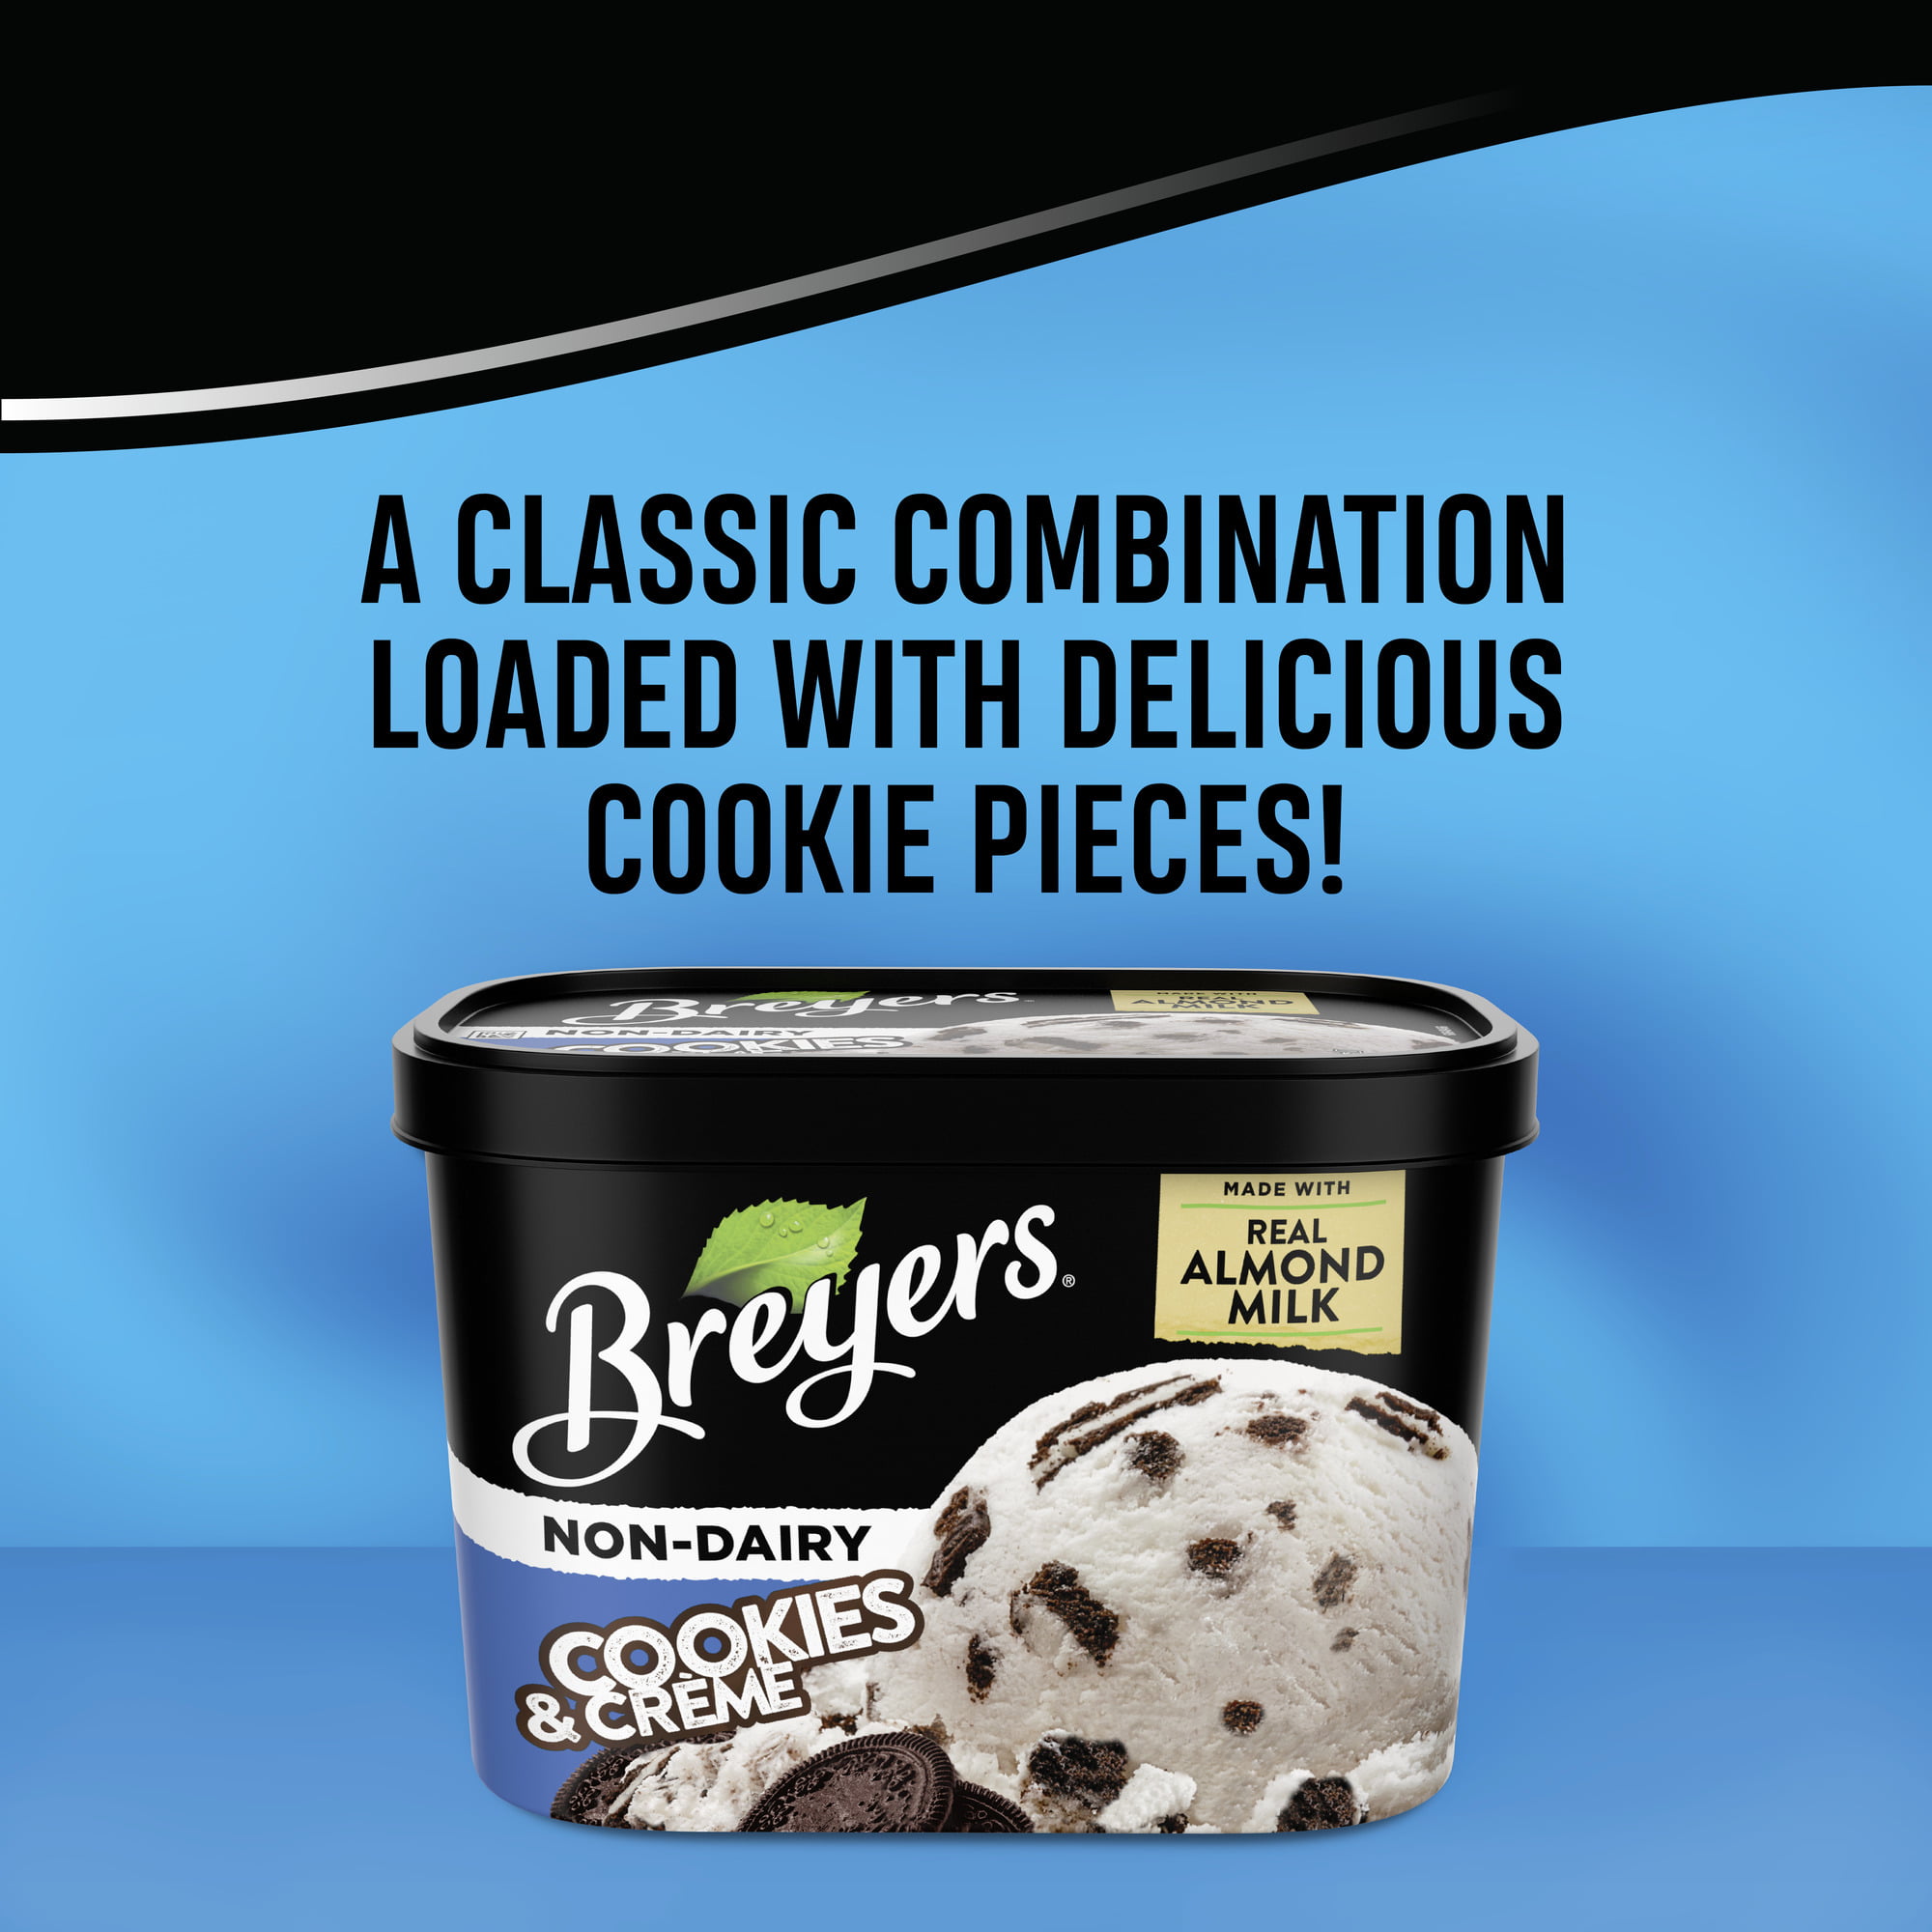 Breyers Non-Dairy Cookies and Creme Frozen Dessert, 48 oz - image 5 of 9